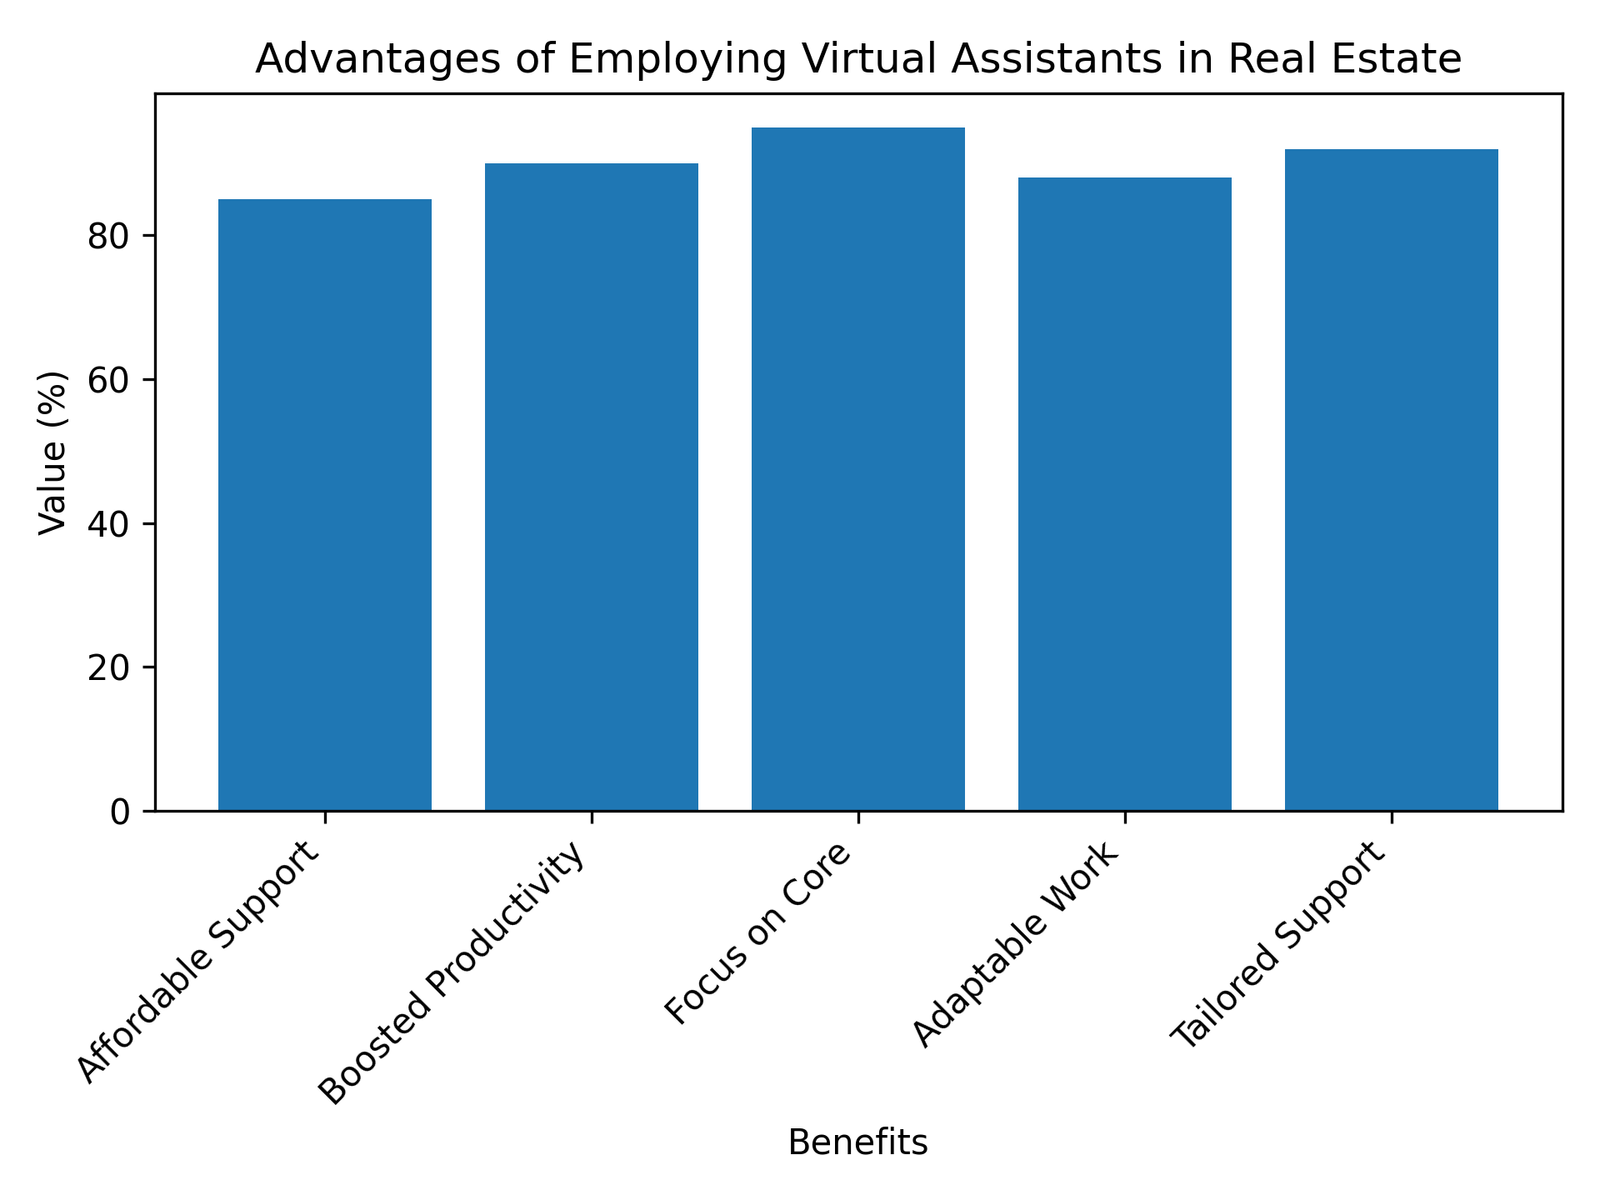 Advantages of employing virtual assistants in real estate chart with metrics and values